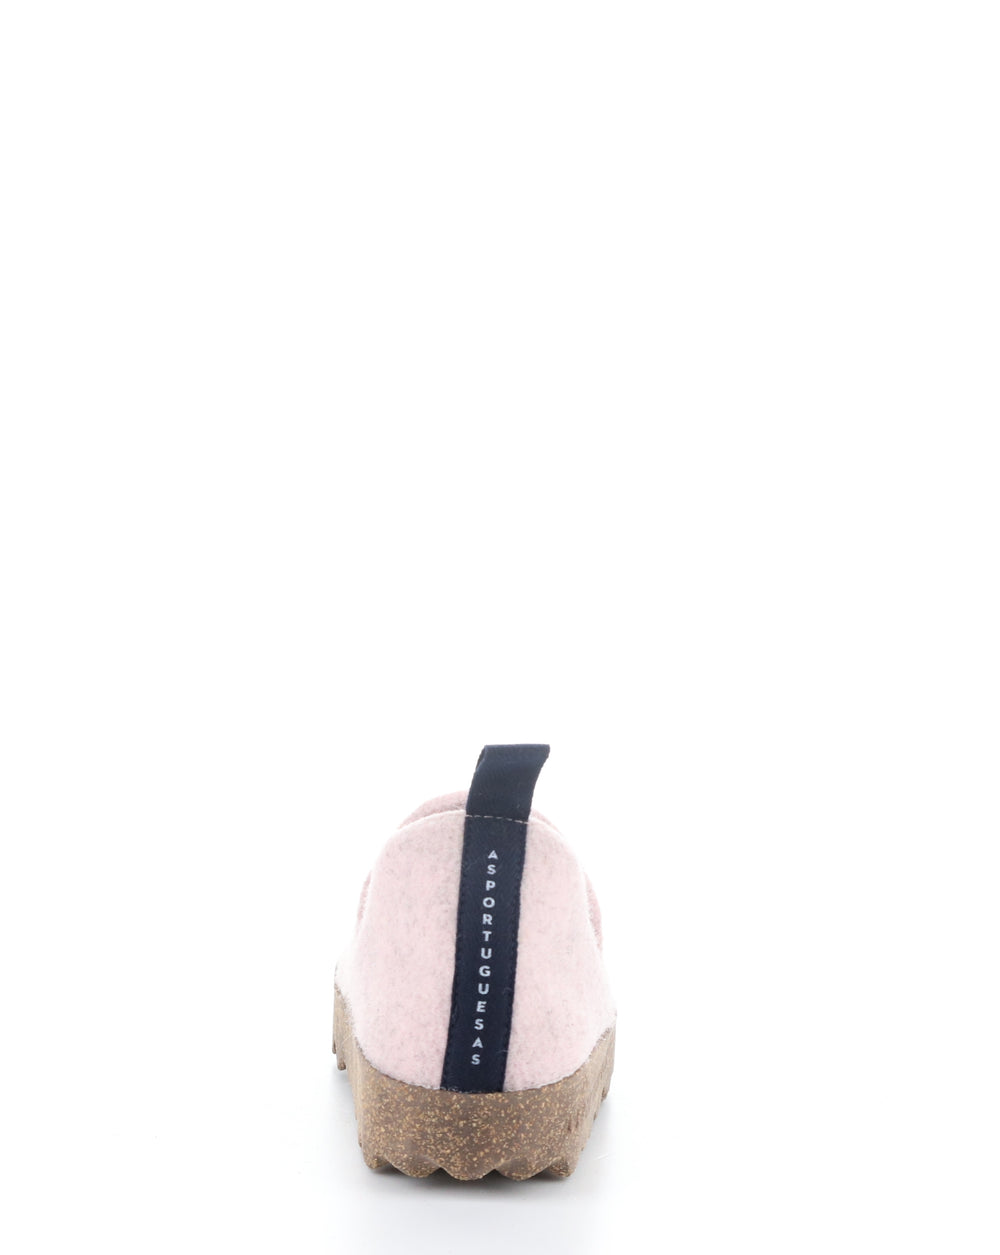 CITY Pink Round Toe Shoes